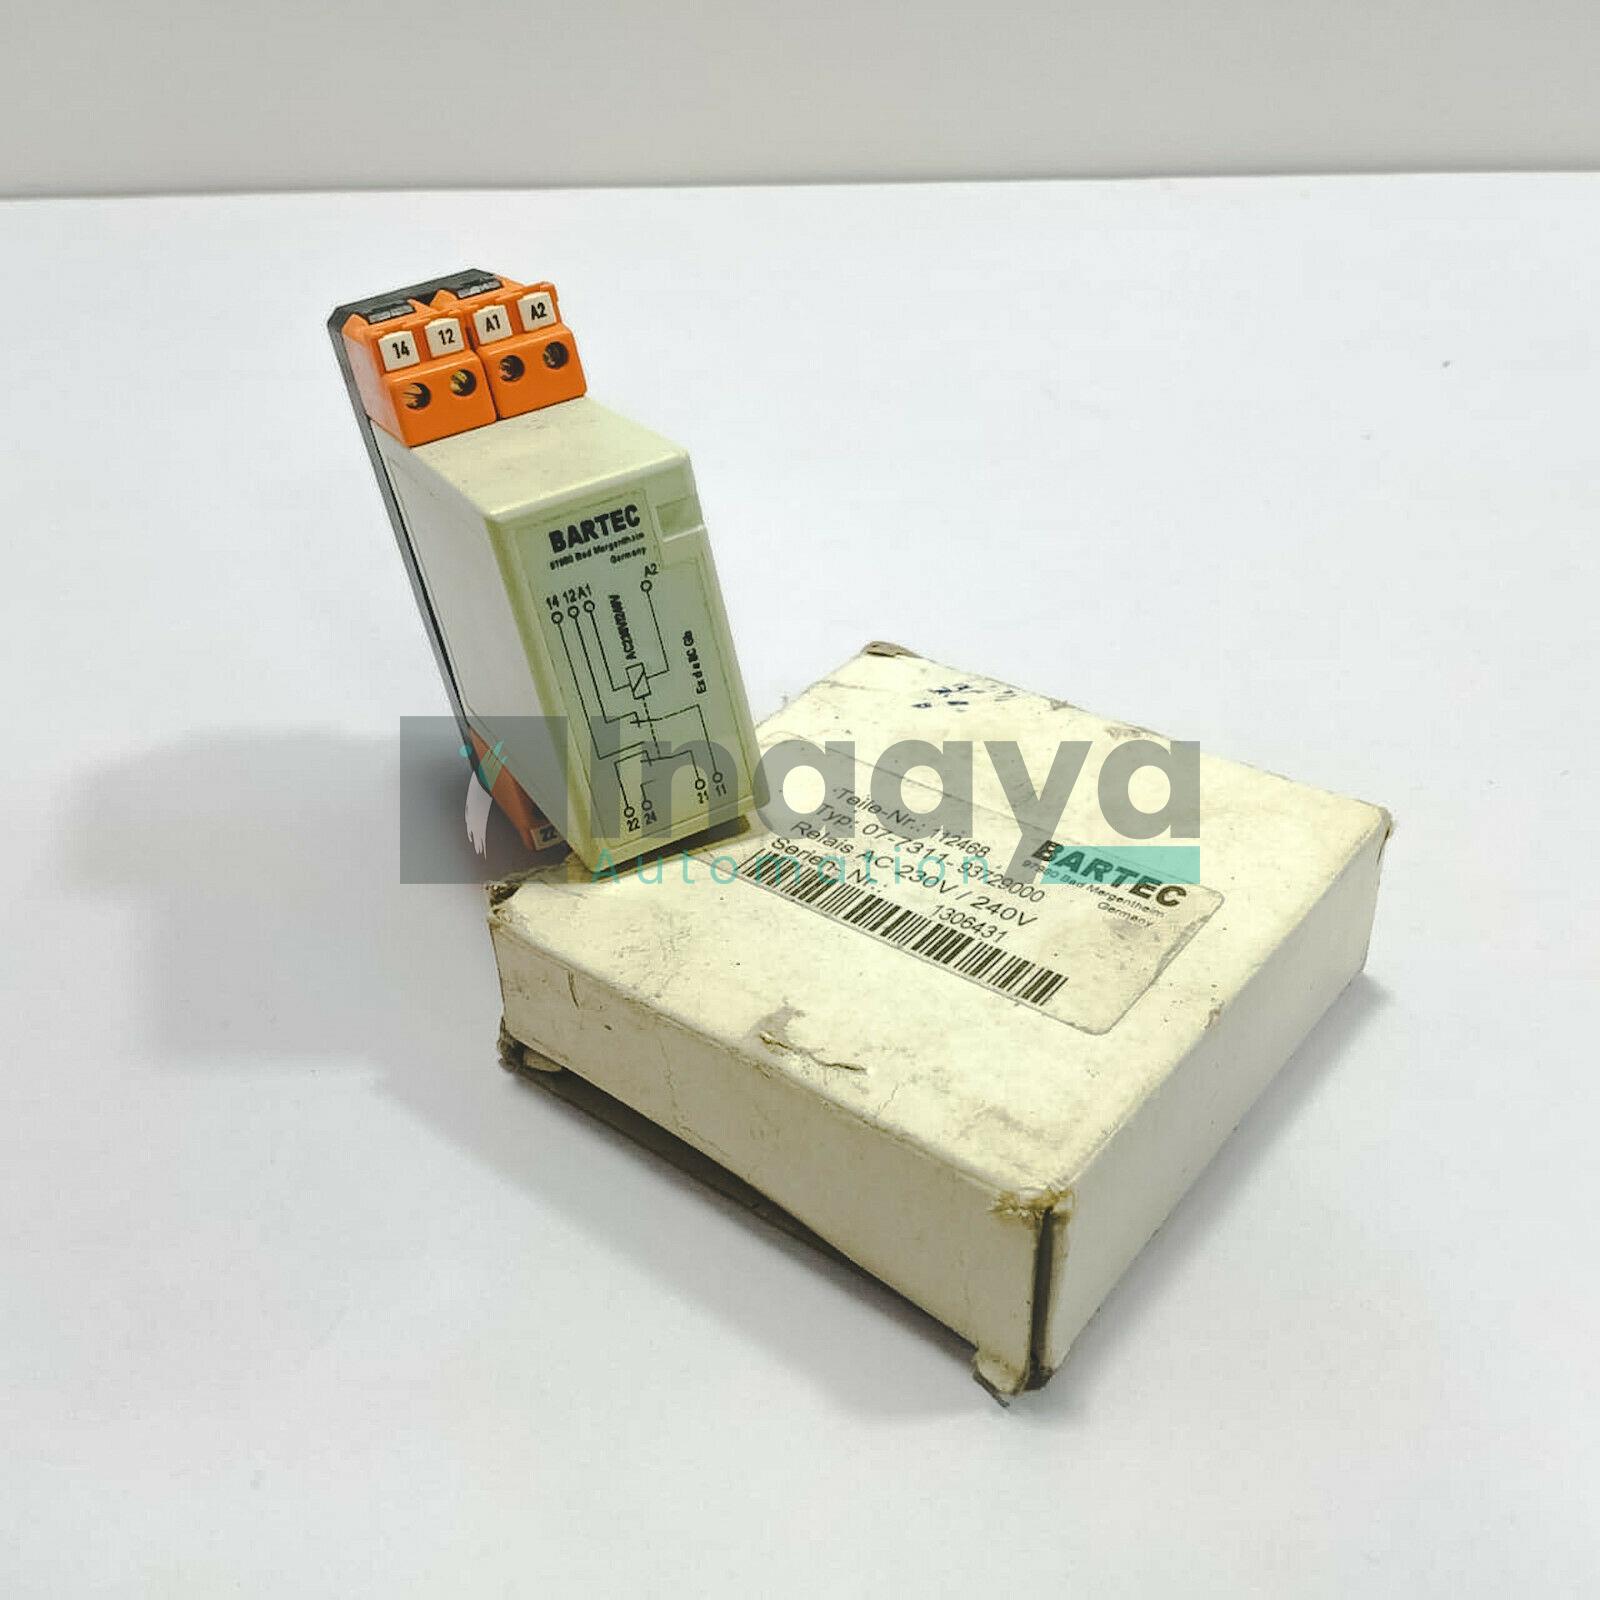 Bartec 07-7311-93729000 Changeover Contacts Relay